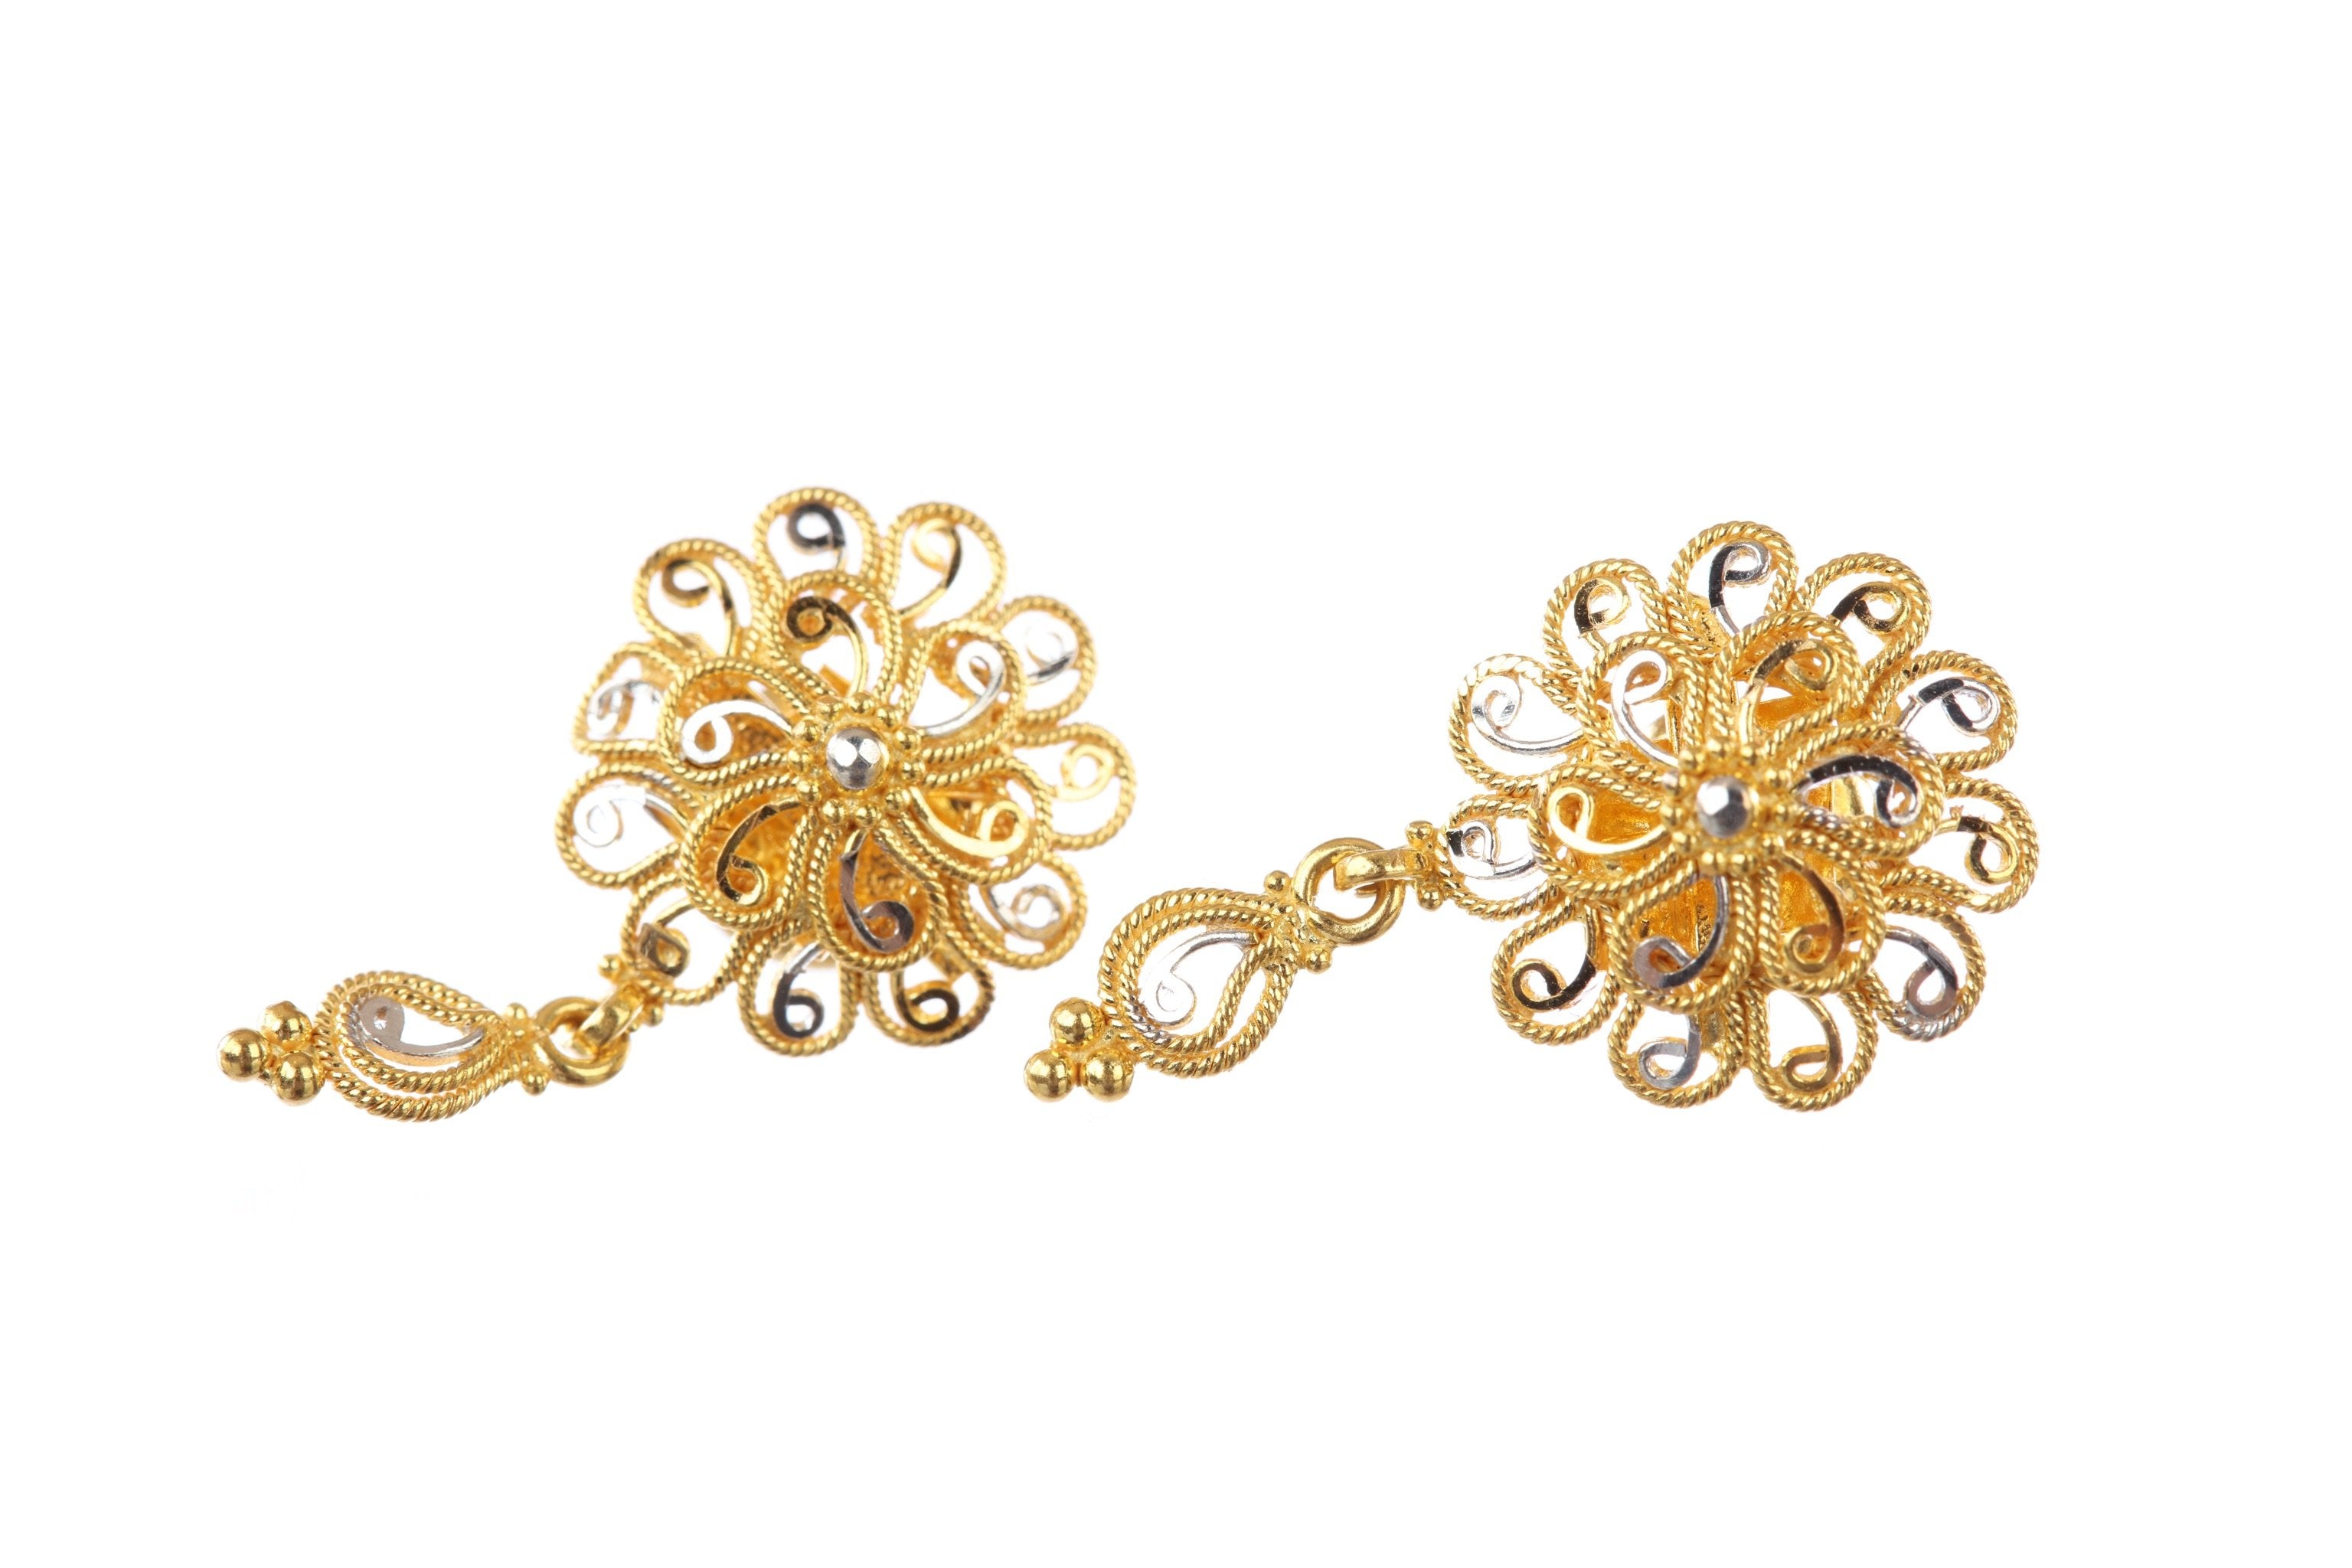 Explore The World of Latest Design of Gold Earrings